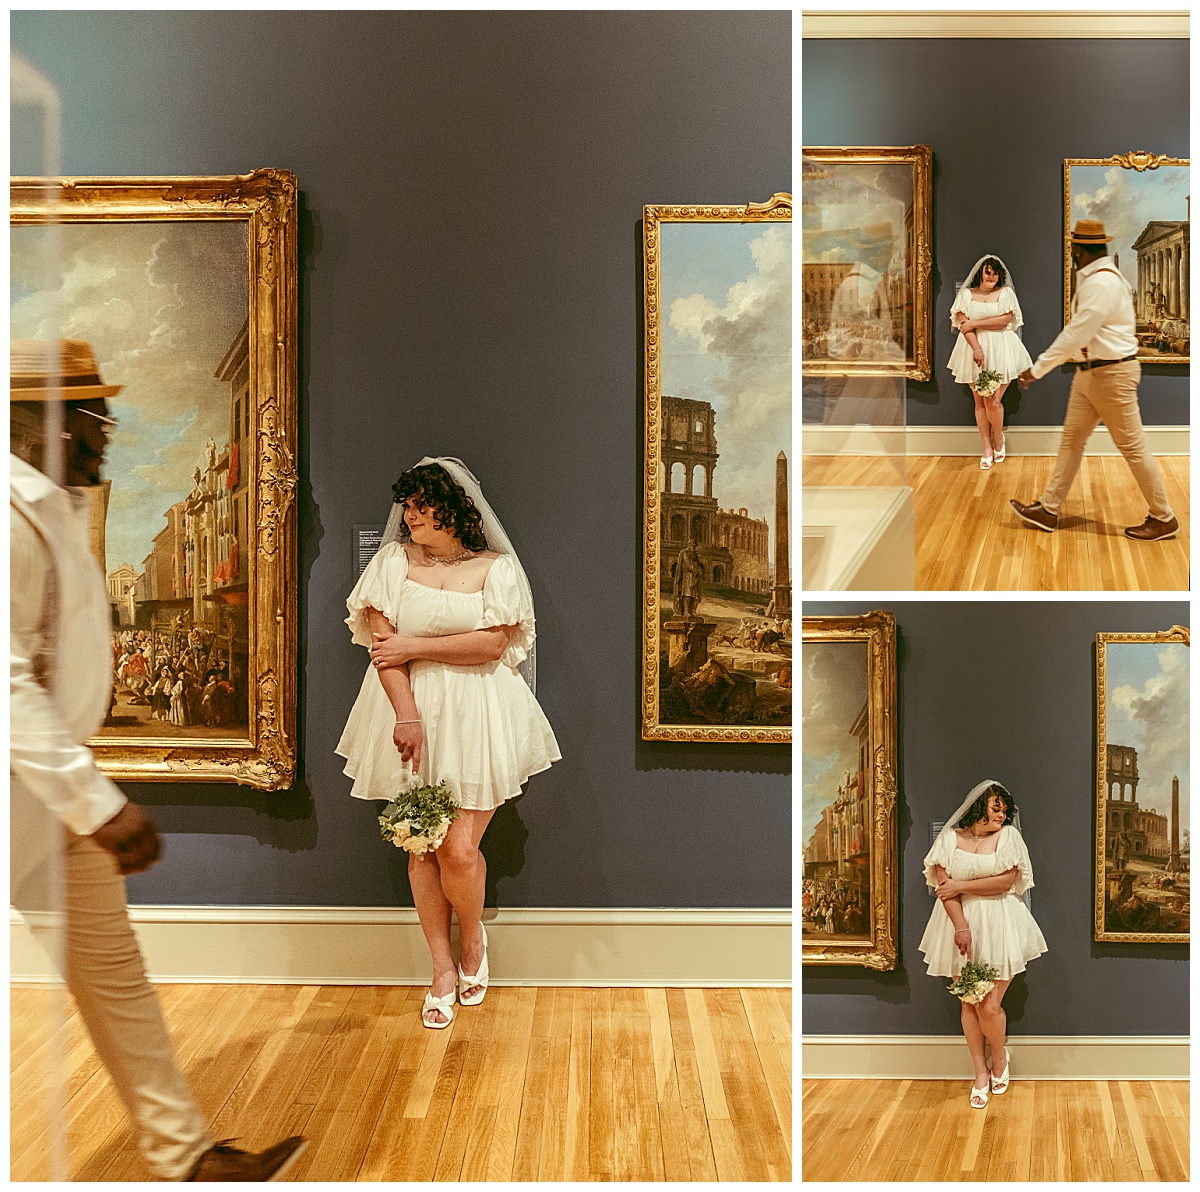 groom walks by bride leaning against wall during wedding portrait session